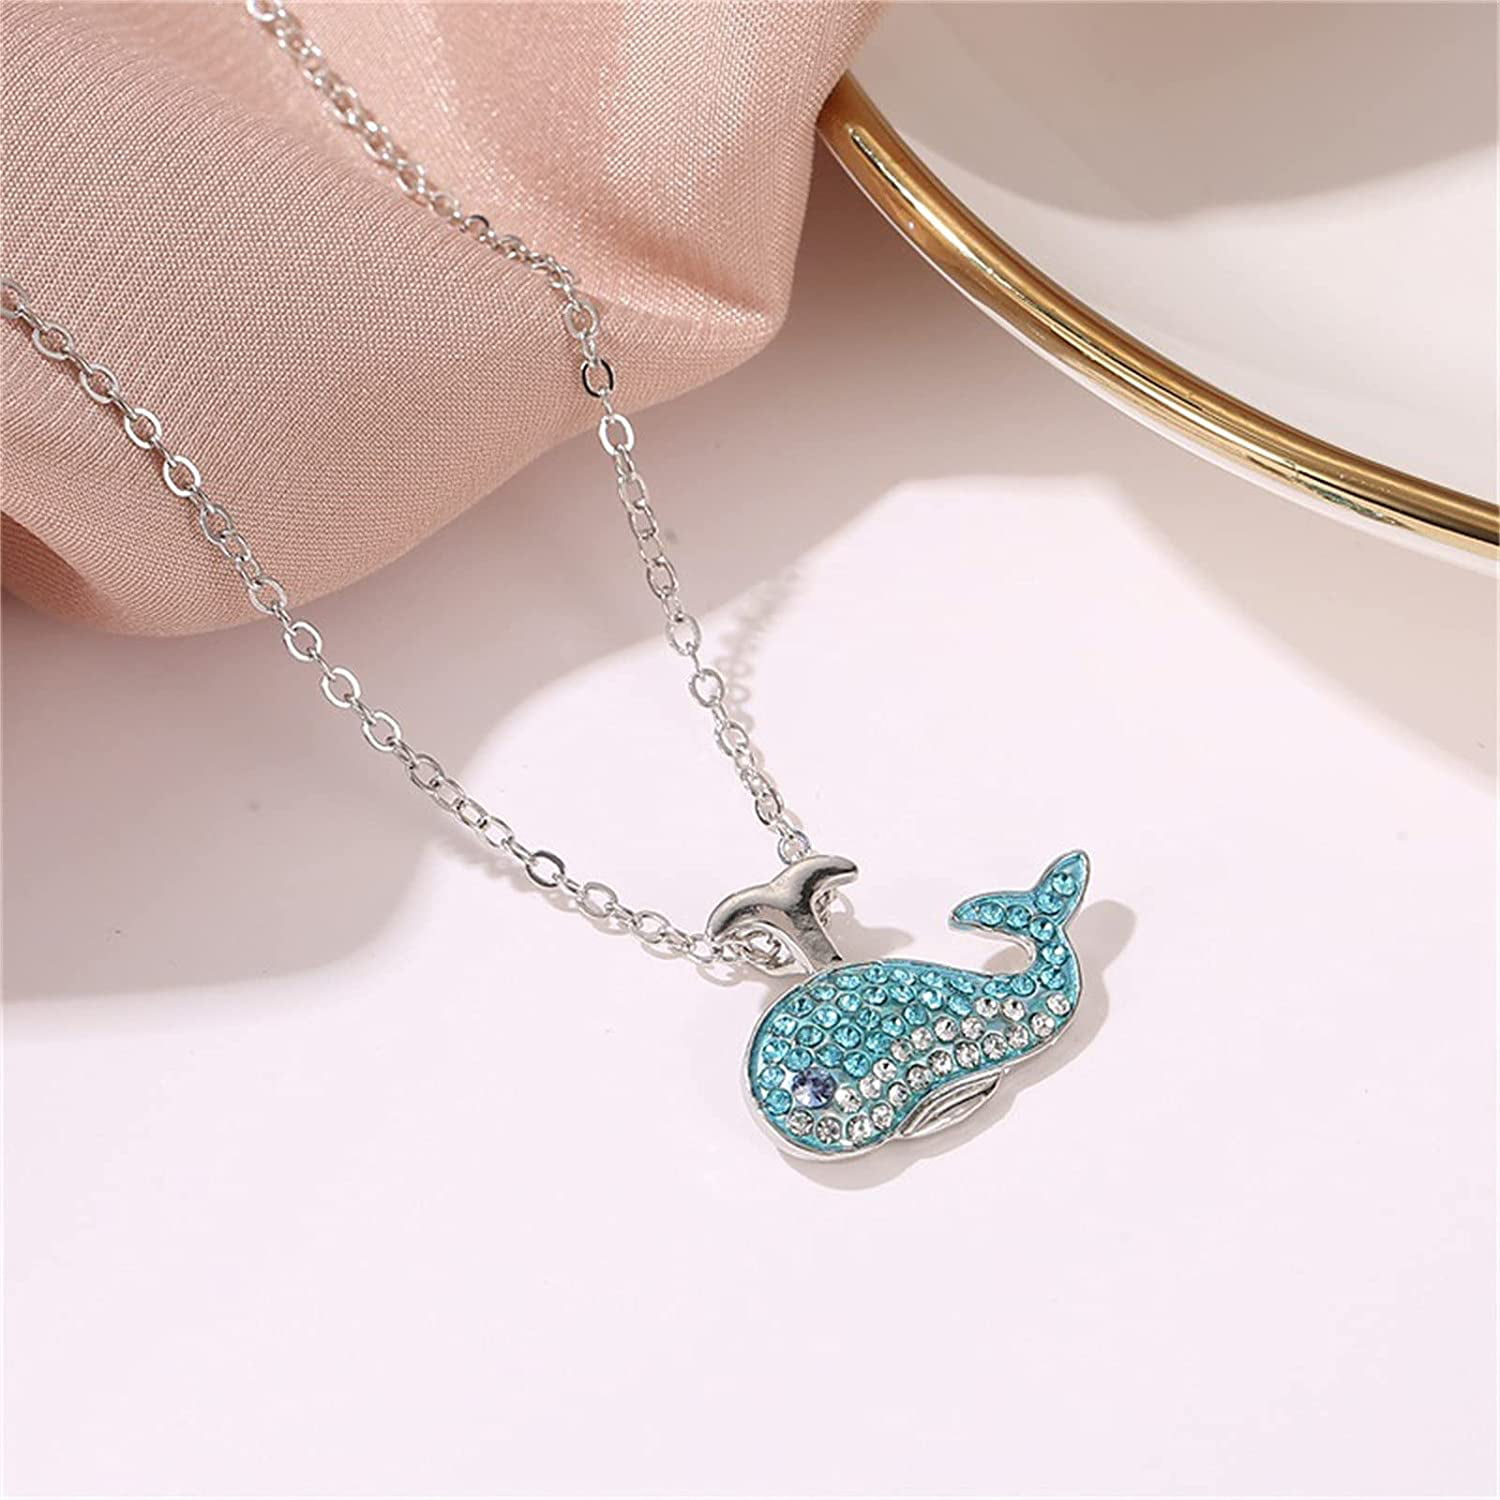 Personalized Women Temperament Silver Sea Turtle Whale Pendant Necklace Rhinestone Necklace Jewelry Clavicle Chain Dreamy Accessories Wonderful Gift for Women 